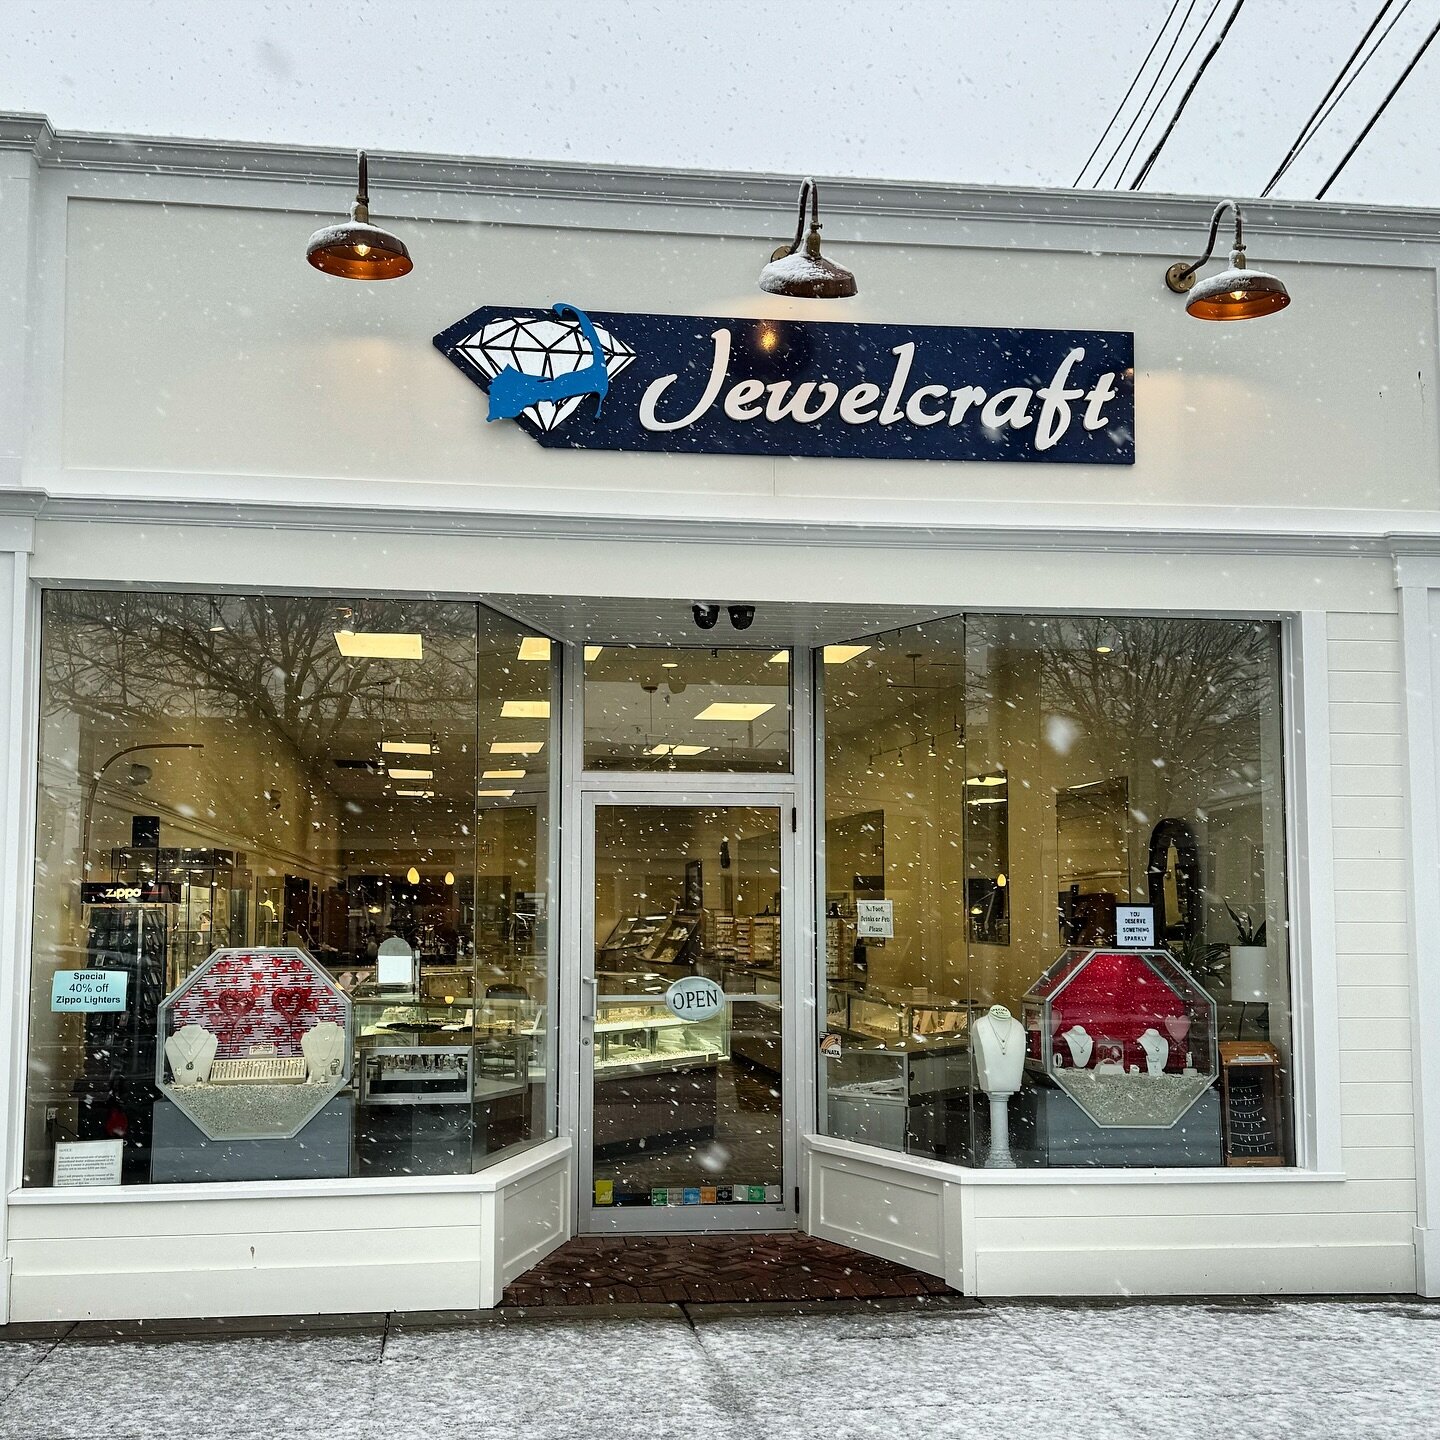 We are open until the snow tells us we shouldn&rsquo;t be. Stop in for something sparkly for your sweetheart! #valentinesdaygift #winterwonderland @hyannismainstreet 

#shopsmall #shoplocal #capecod #capecodjewelry #custommade #giftideas #sparkly #sh